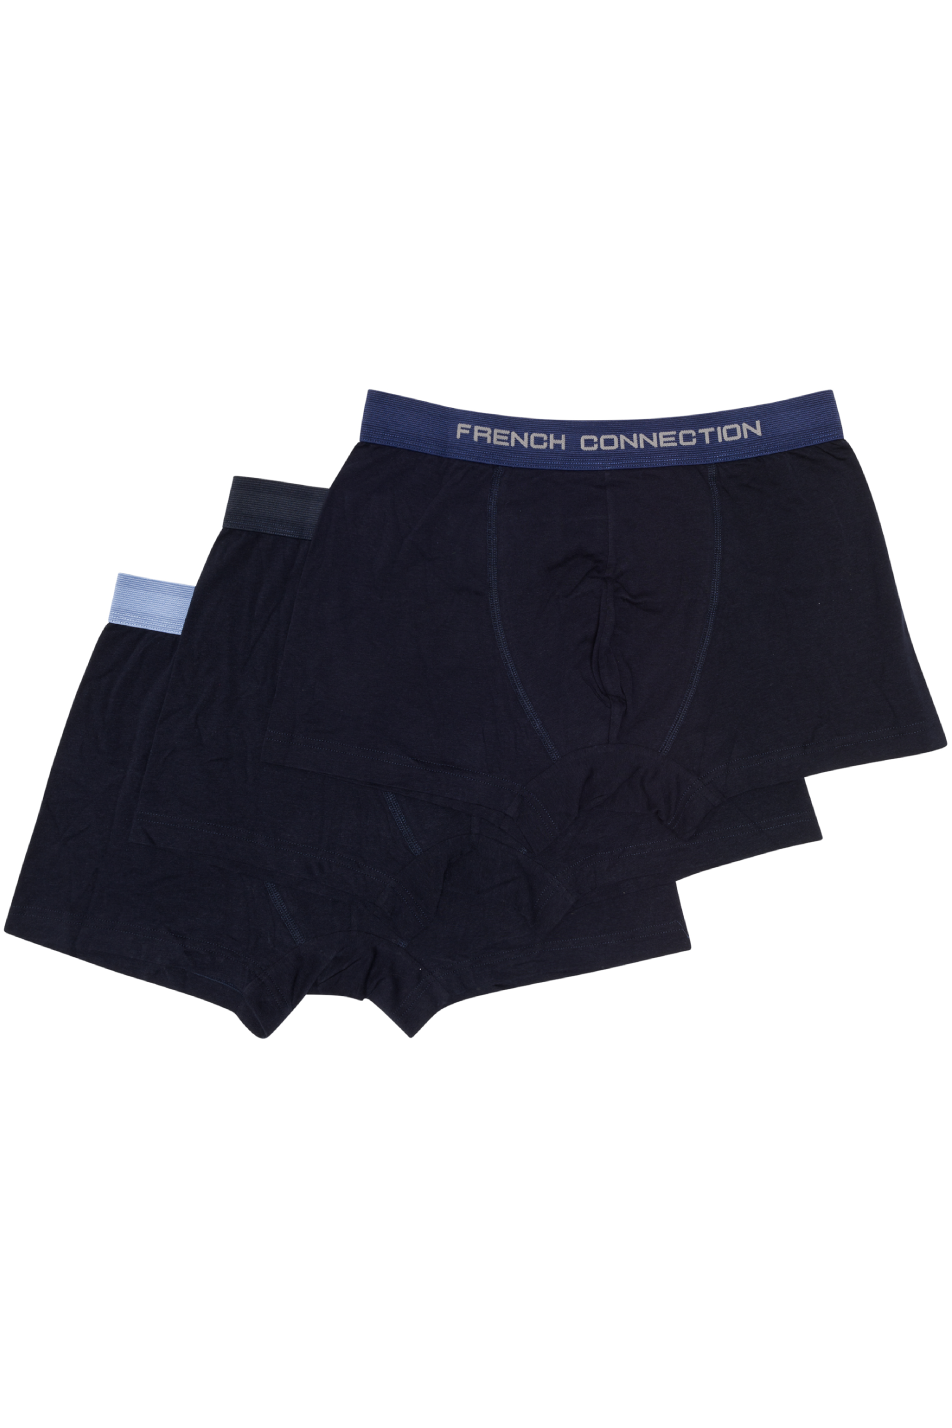 French Connection 3 Pack Men's Boxer